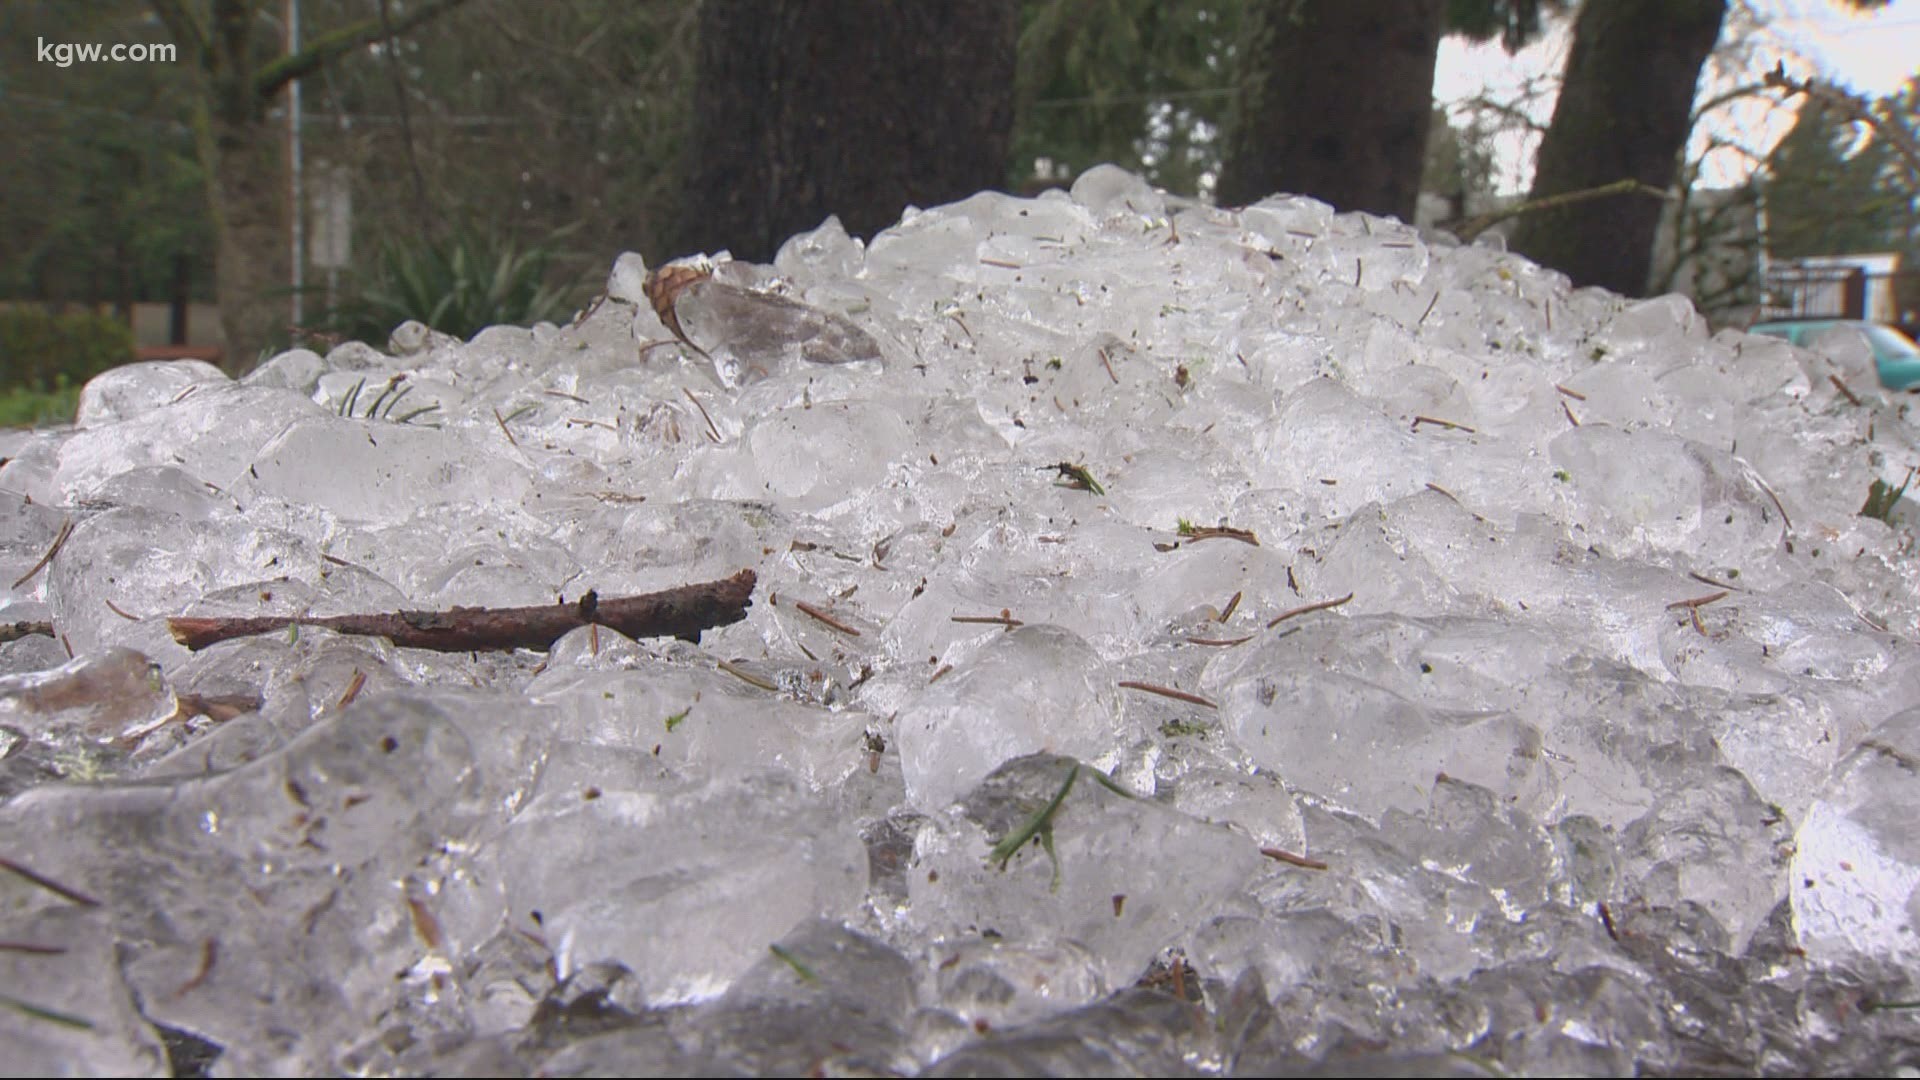 The winter weather has caused huge problems for people living in Marion County. Christine Pitawanich has the latest.